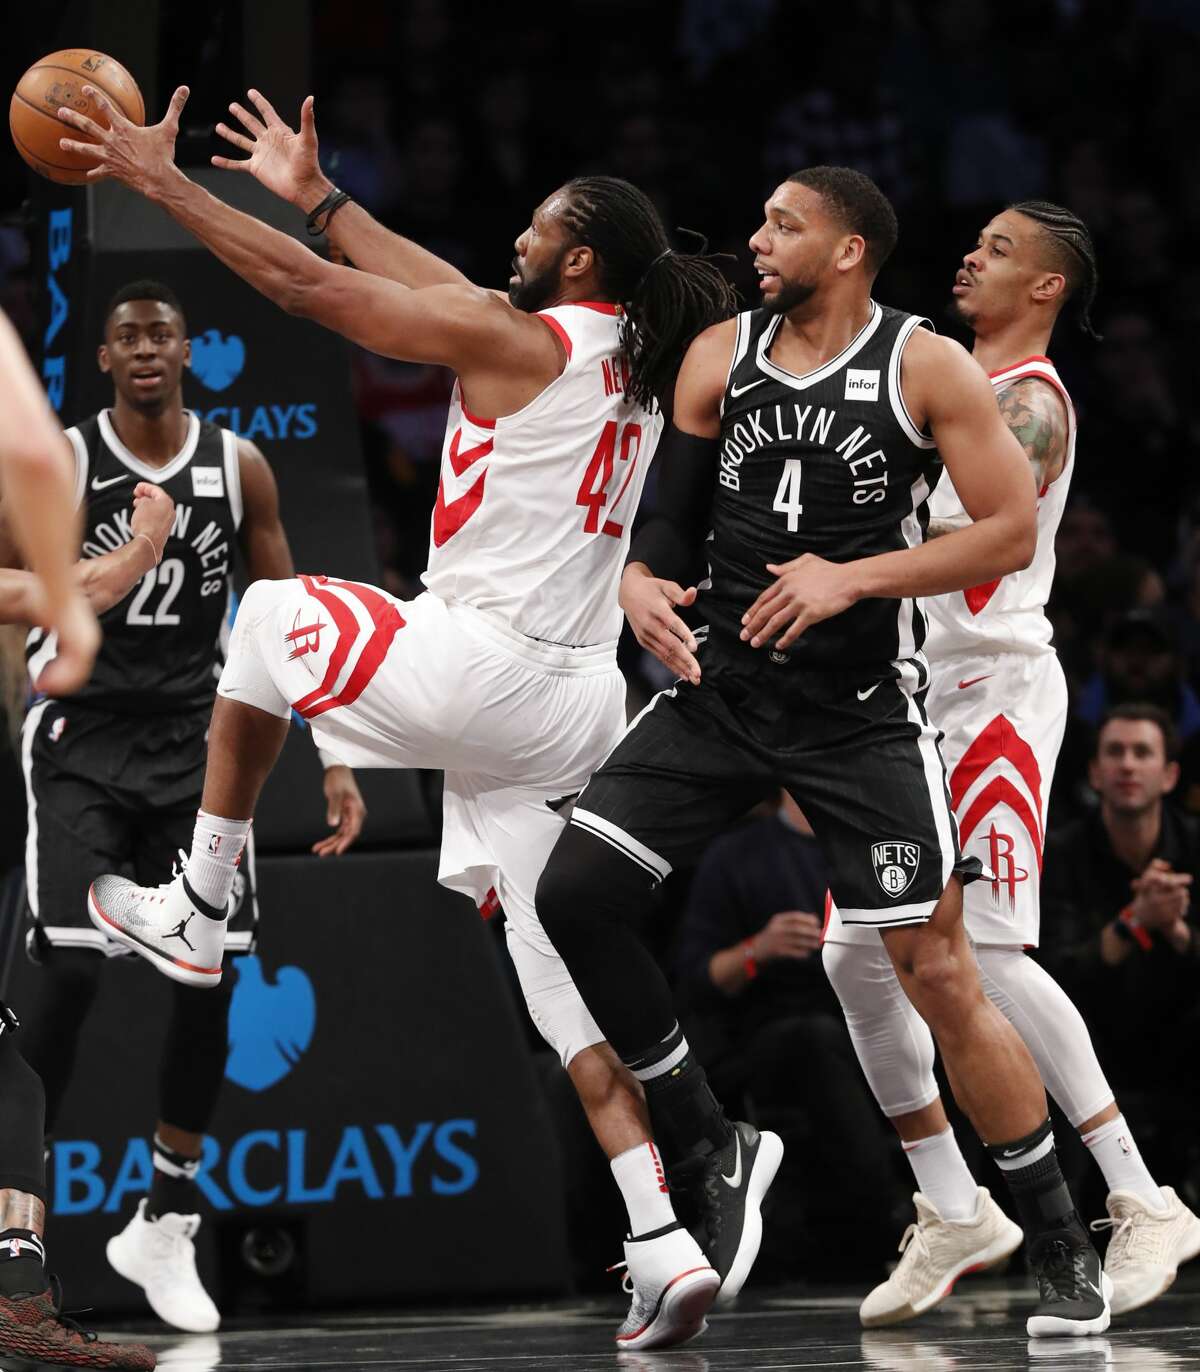 Houston Rockets center Nene Hilario (42) grabs a rebound i front of Brooklyn Nets center Jahlil Okafor (4) with Nets guard Caris LeVert (22) and the Rockets' Gerald Green, right, watching during the first half of an NBA basketball game, Tuesday, Feb. 6, 2018, in New York. (AP Photo/Kathy Willens)